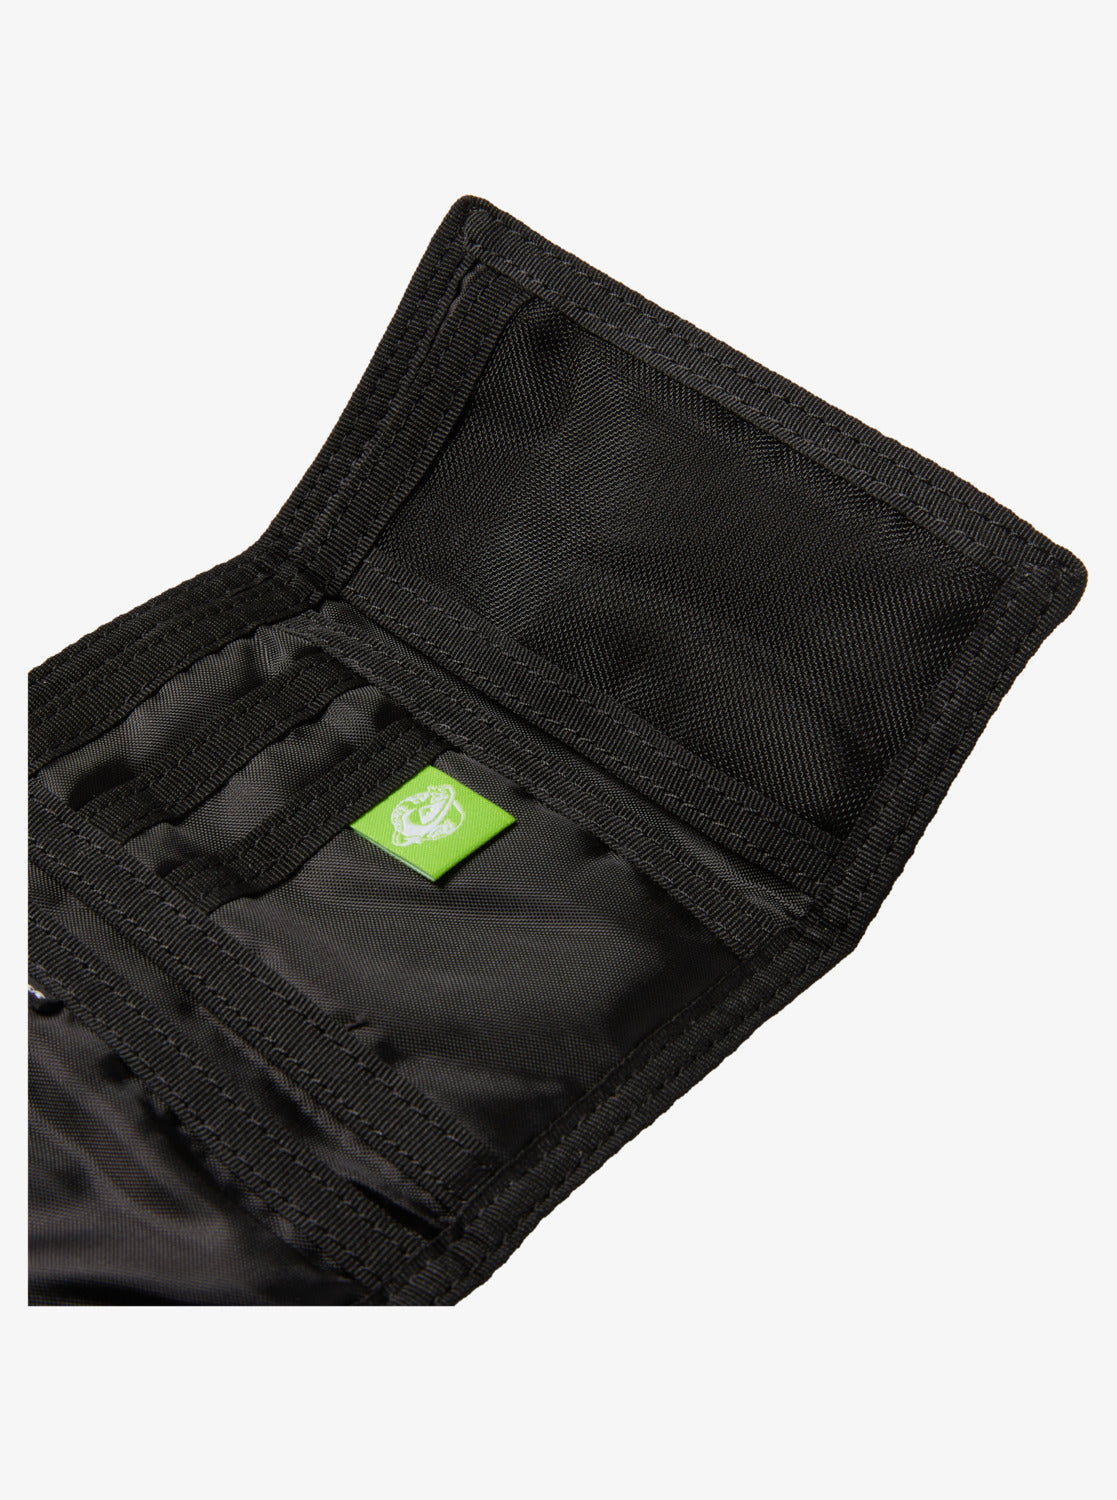 Quiksilver The Everydaily Tri-Fold Wallet in Black AOP Mix Bag